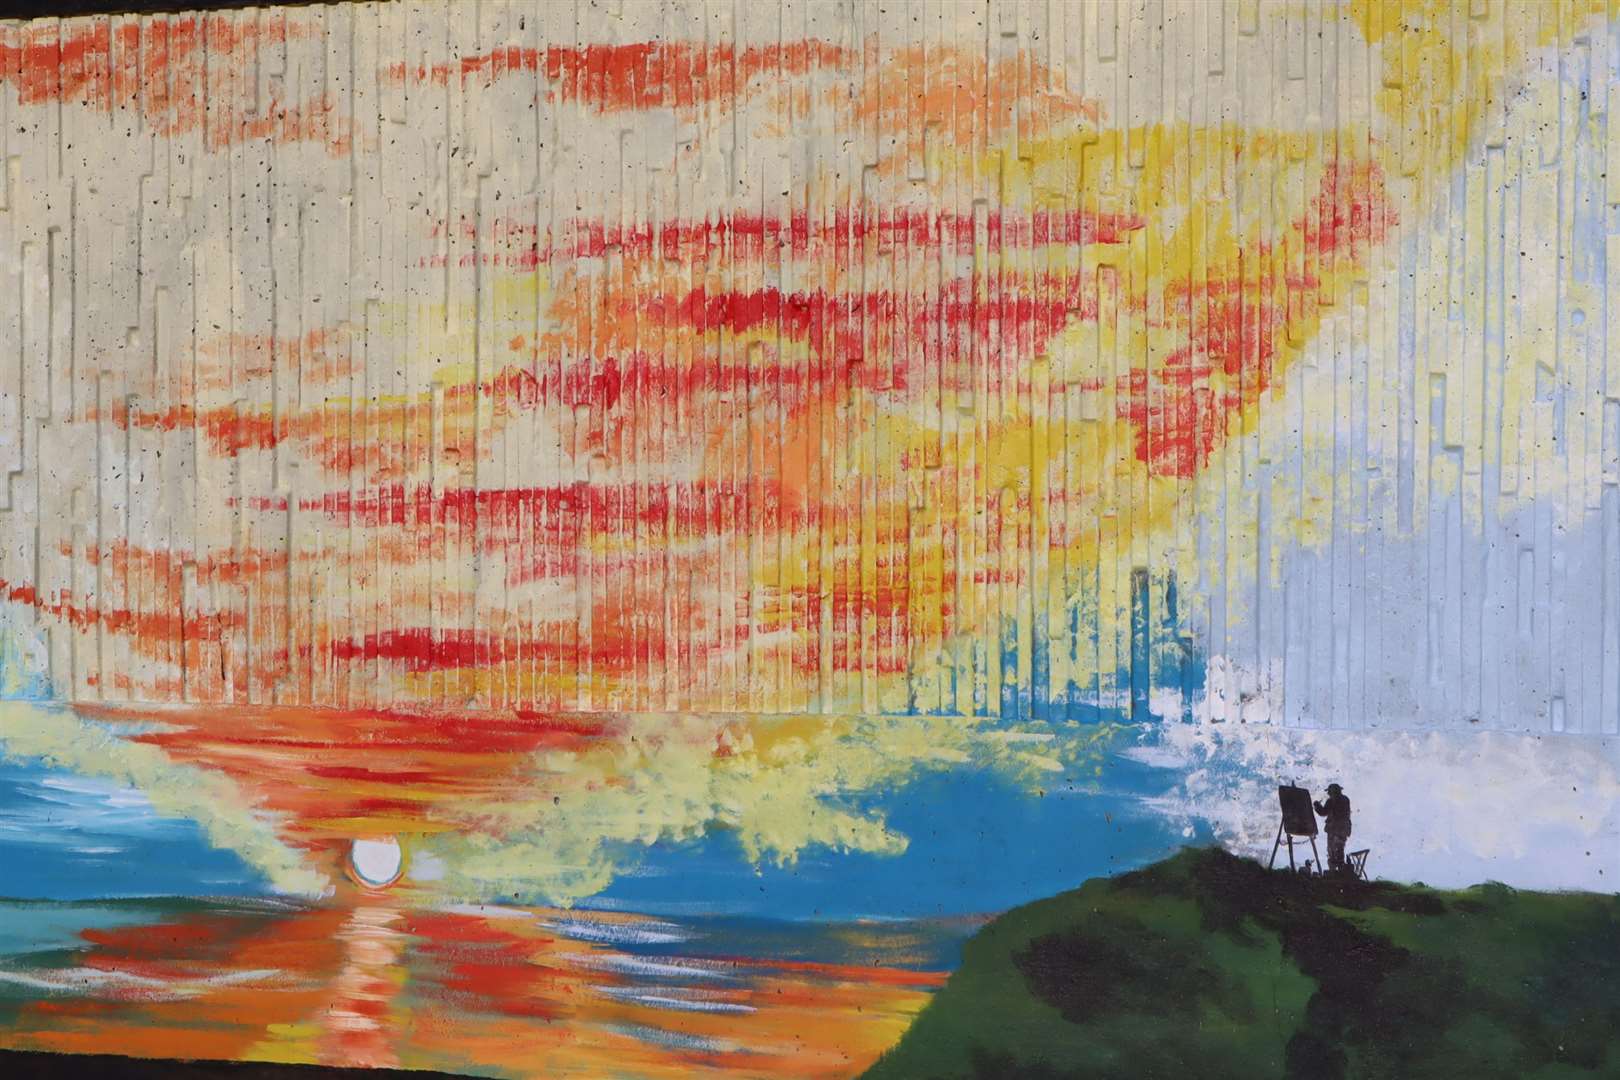 The mural at The Leas, Minster, painted by Richard Jeferies and inspired by Turner's Fighting Temeraire